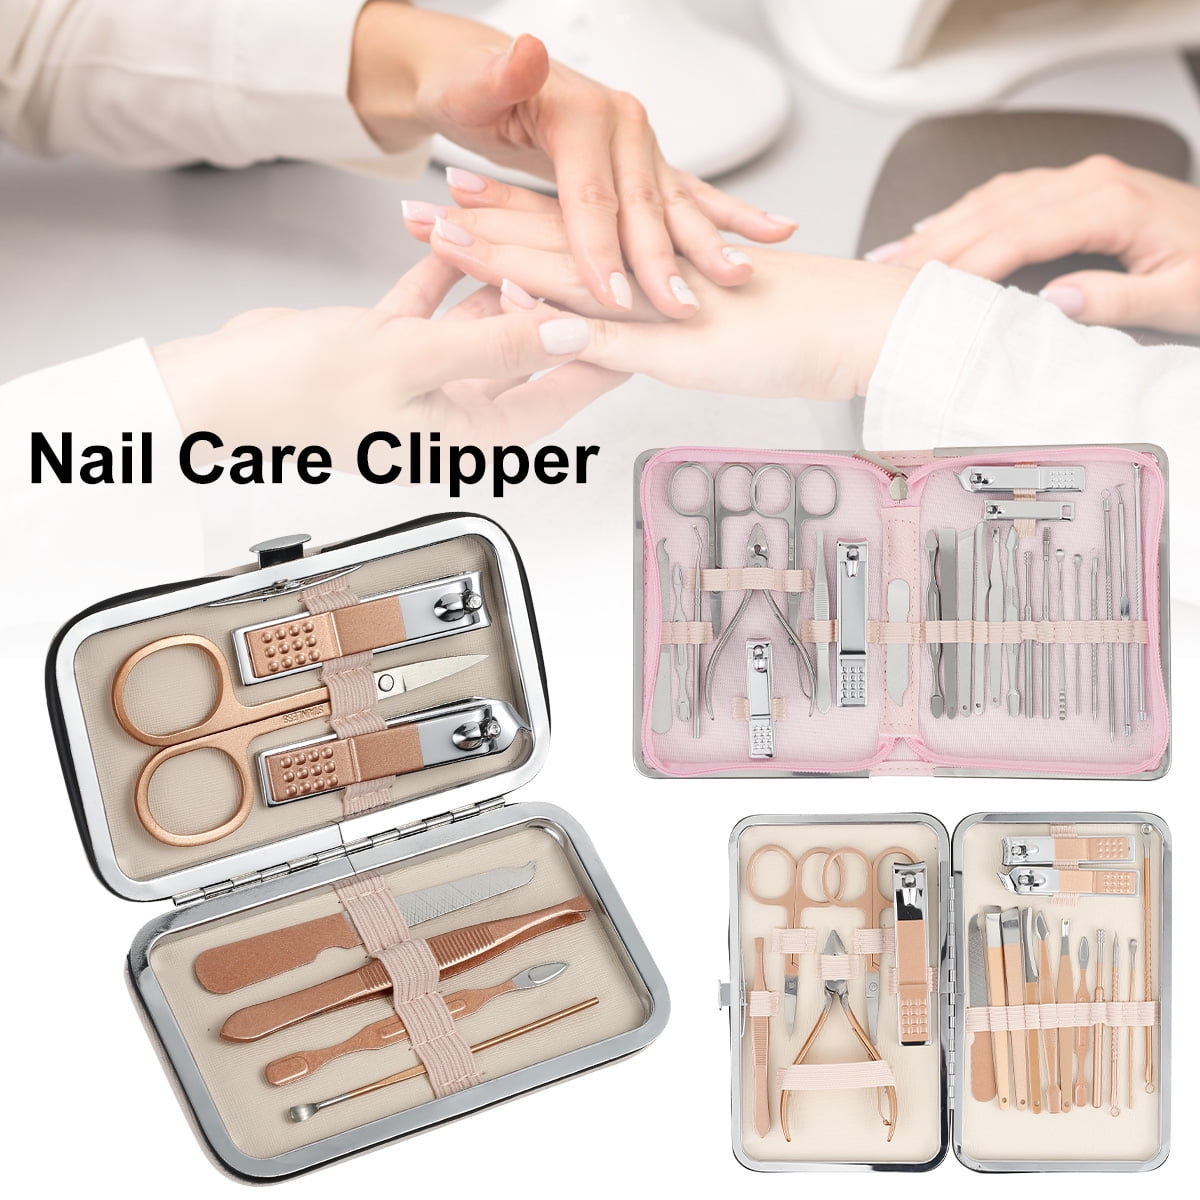 12 In 1 Nail Clipper Kit Care Set Stainless Steel Pedicure Manicure Scissor  Tweezer Ear Pick Makeup Grooming Cutter Cuticle With Case Travel For Women  Multifunction Portable File Tweezers Kits Toe Trimming